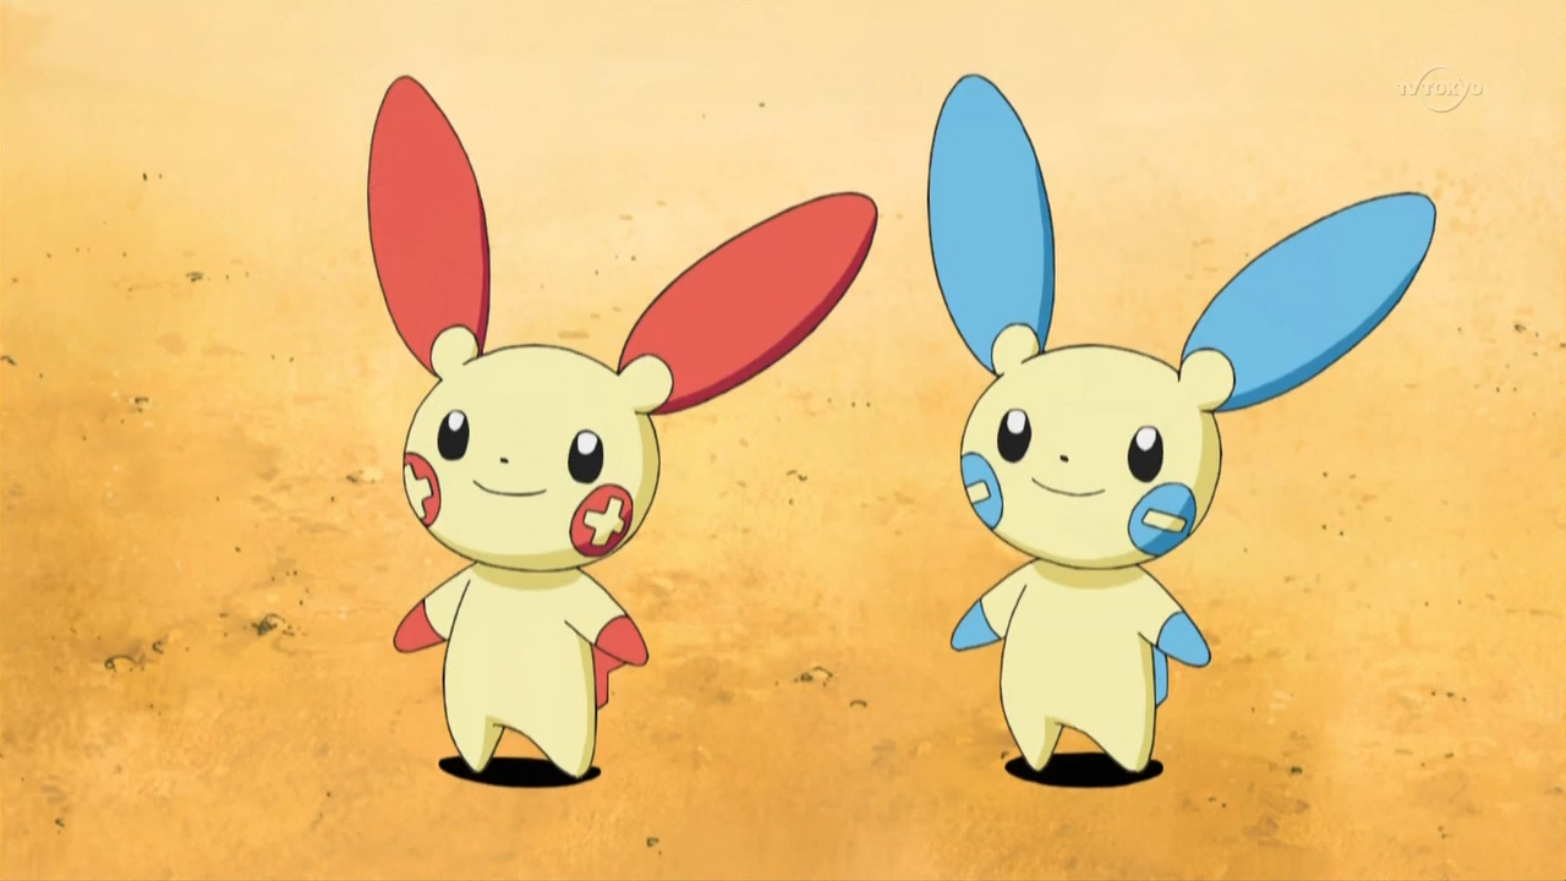 Plusle and Minun from the anime